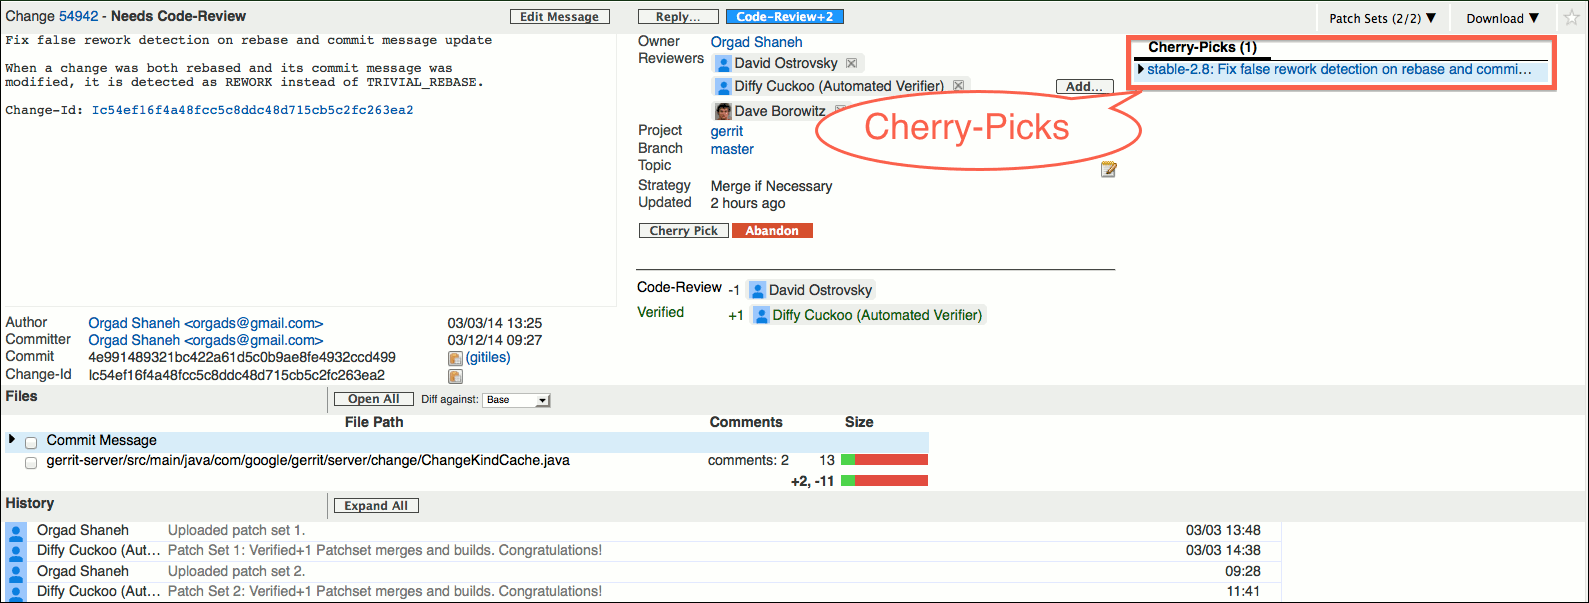 images/user-review-ui-change-screen-cherry-picks.png